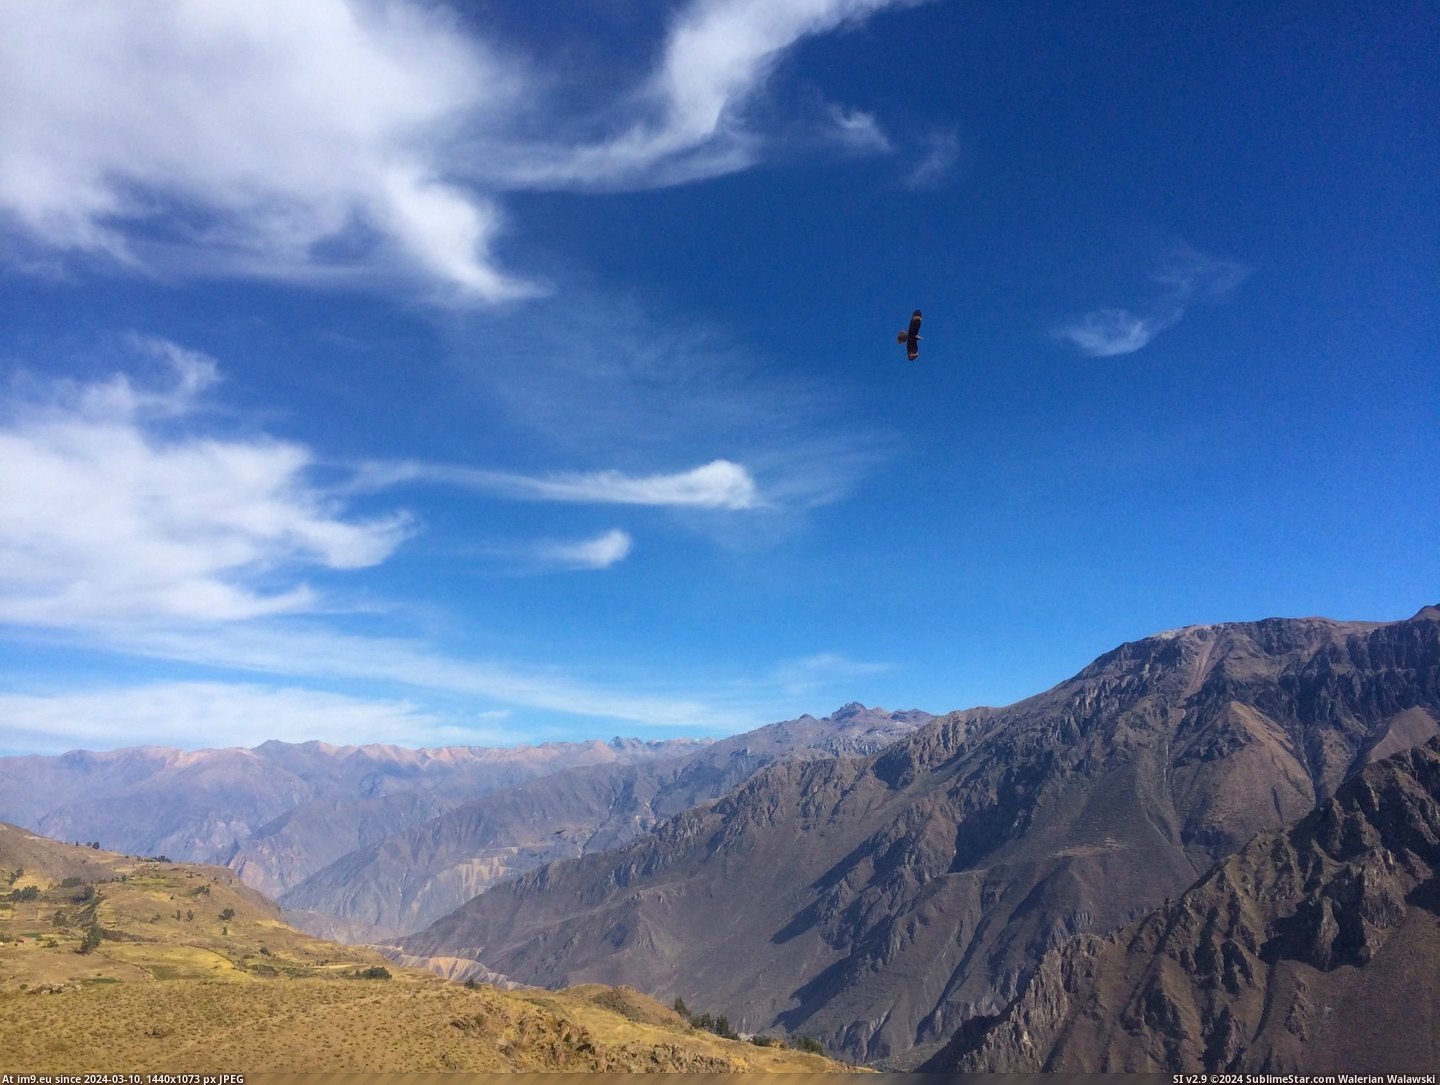 #One #World #Baby #Solo #Deepest #Canyons #Condor #Canyon #3264x2448 #Flying #Peru [Earthporn]  A baby andean condor flying solo above Colca Canyon, Peru (one of the deepest canyons in the world) [3264x2448] Pic. (Obraz z album My r/EARTHPORN favs))